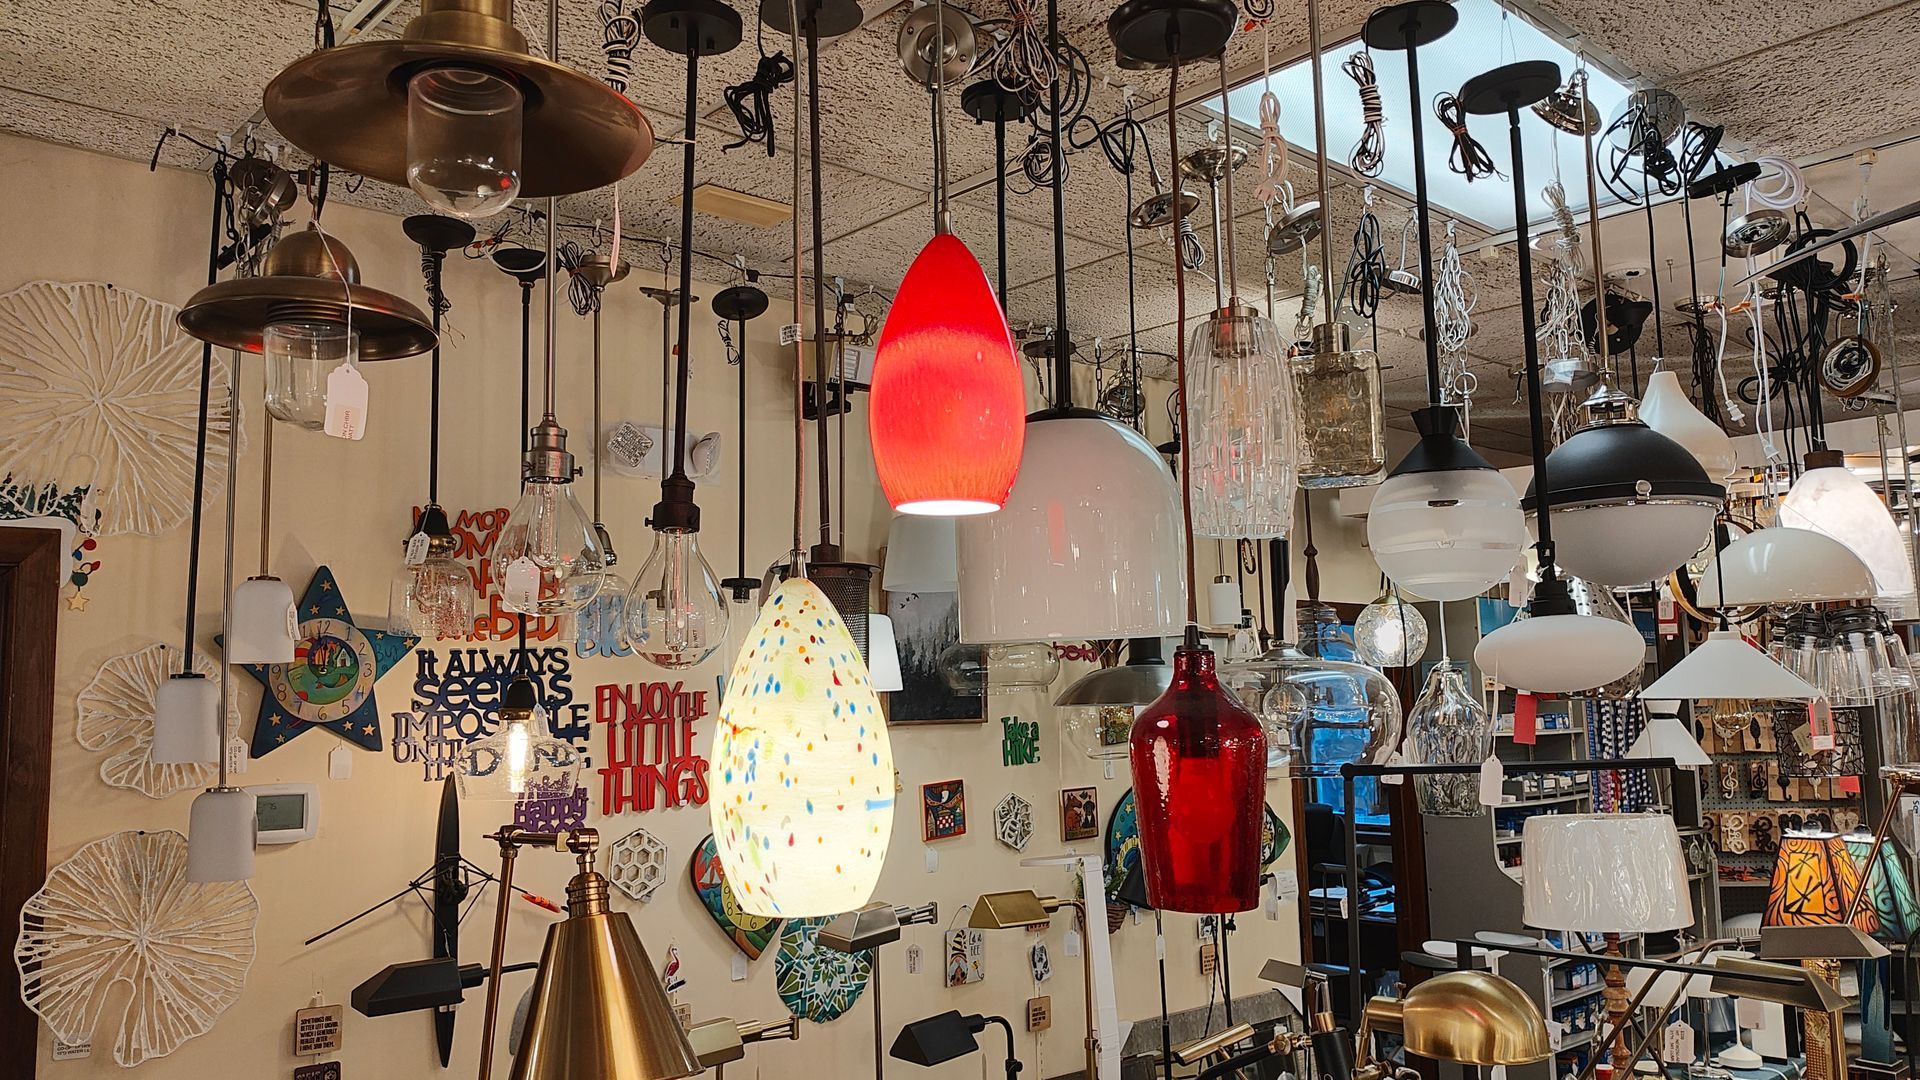 There are many different types of lights hanging from the ceiling. ct lighting local